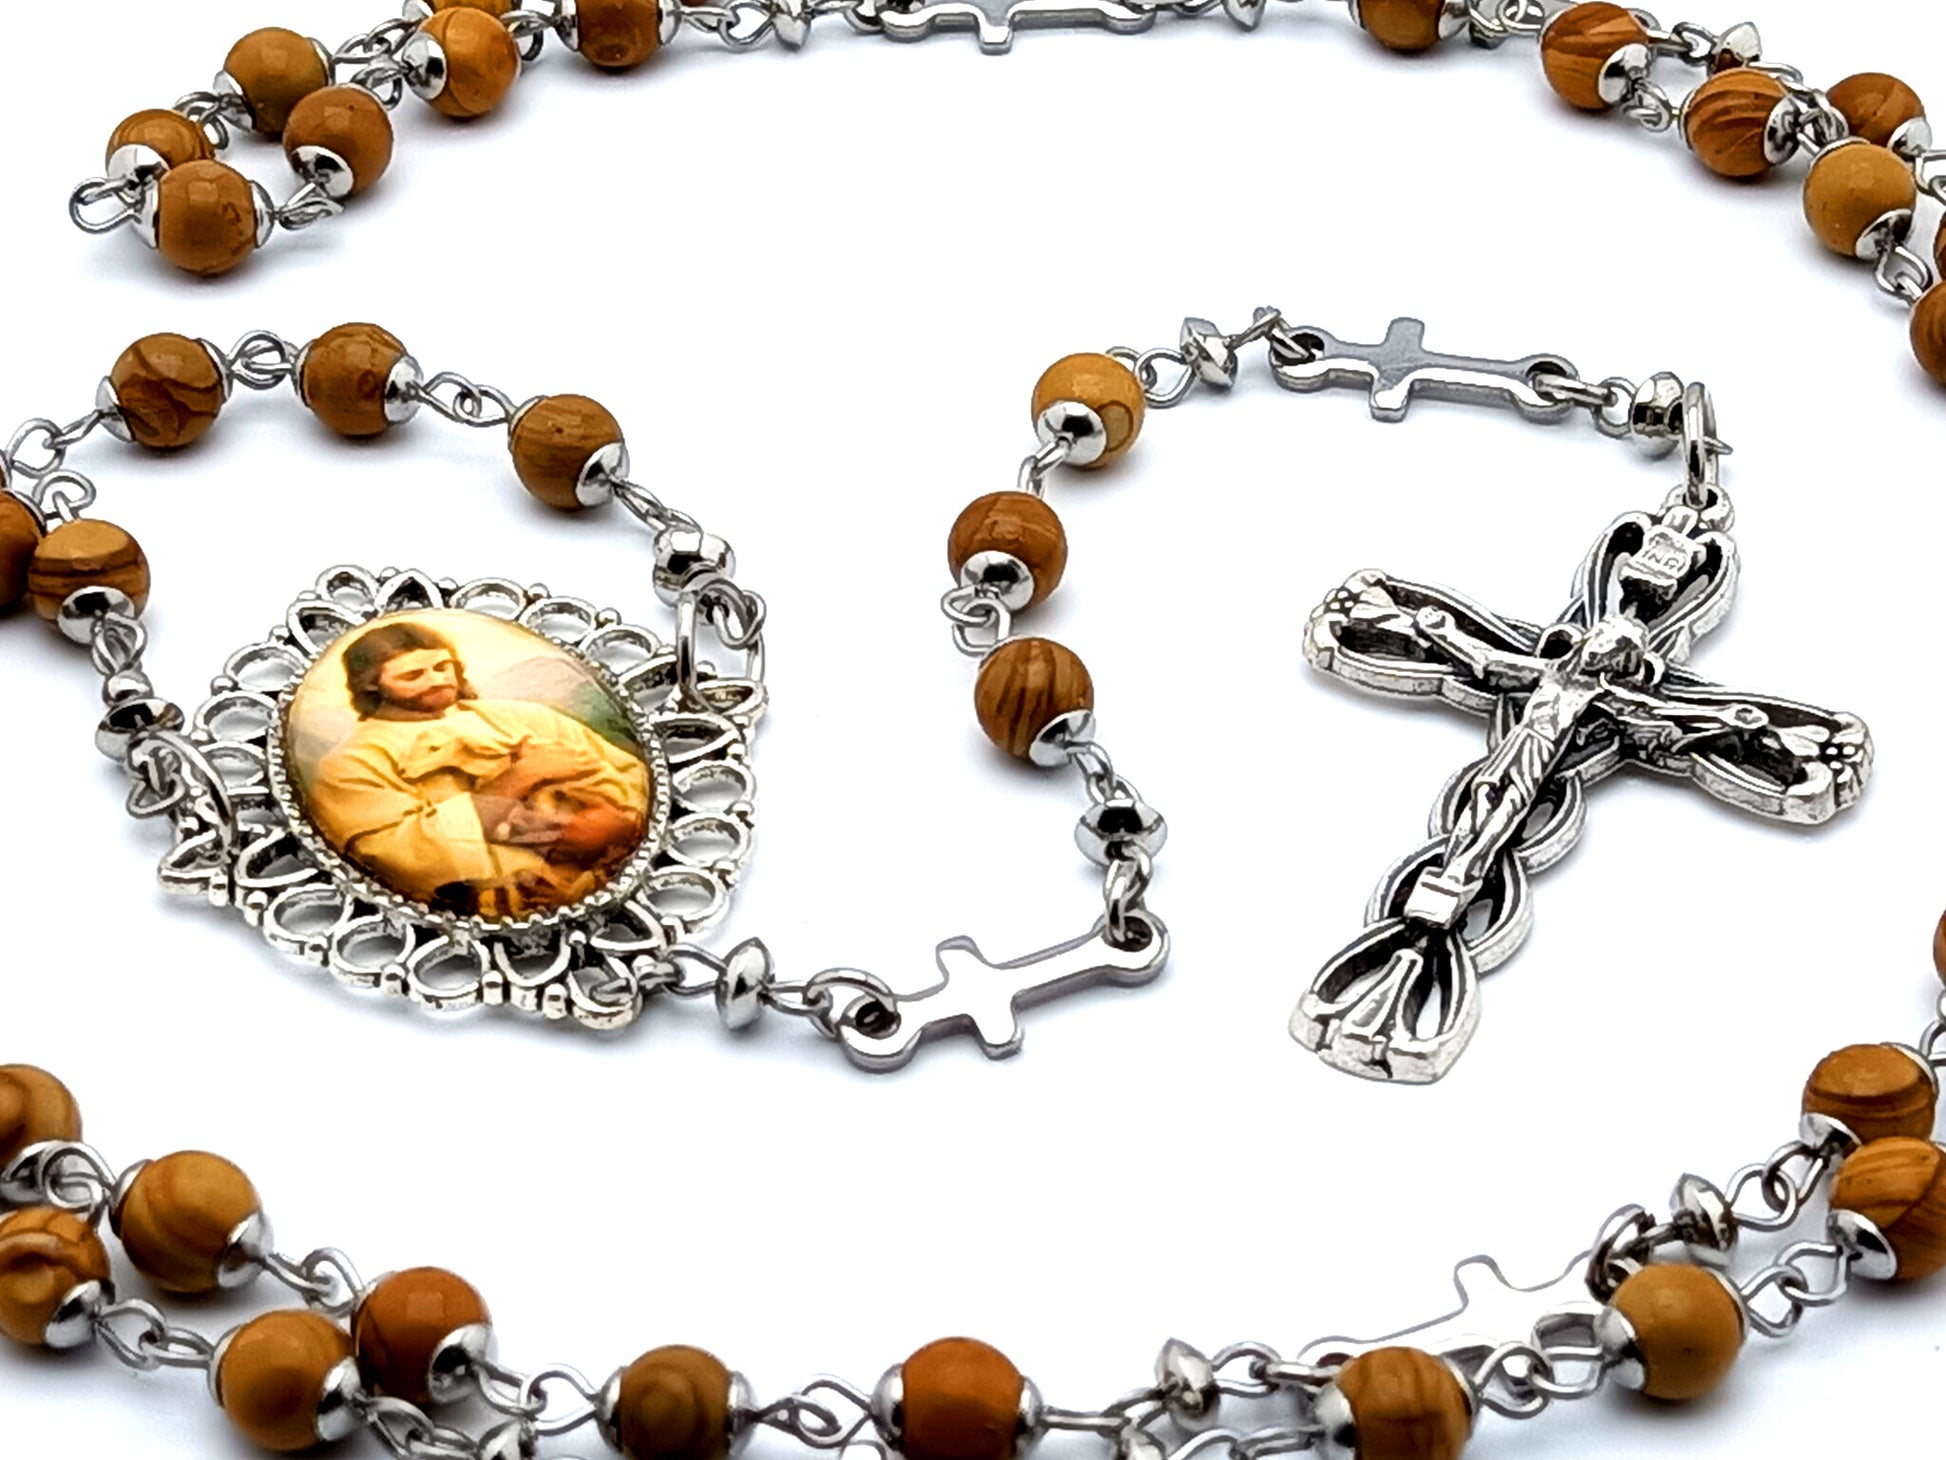 The Good Shepherd unique rosary beads with sand wood gemstone beads and stainless steel linking cross beads and a rope and heart crucifix.